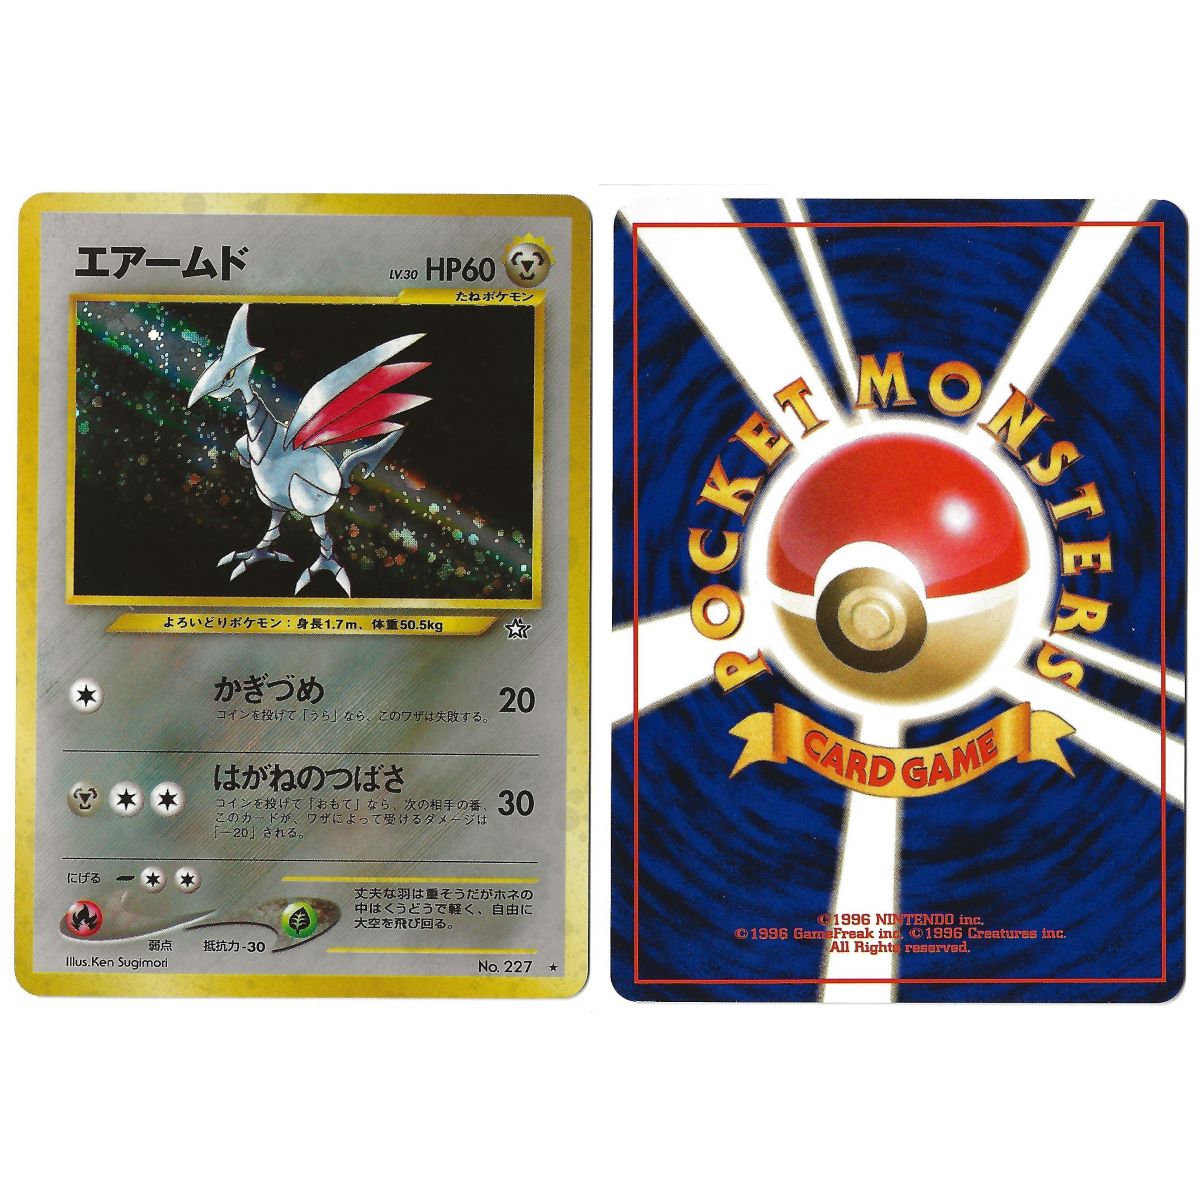 Skarmory (2) Nr. 227 Gold, Silber, in eine neue Welt ... N1 Holo Unlimited Japanese View Scan